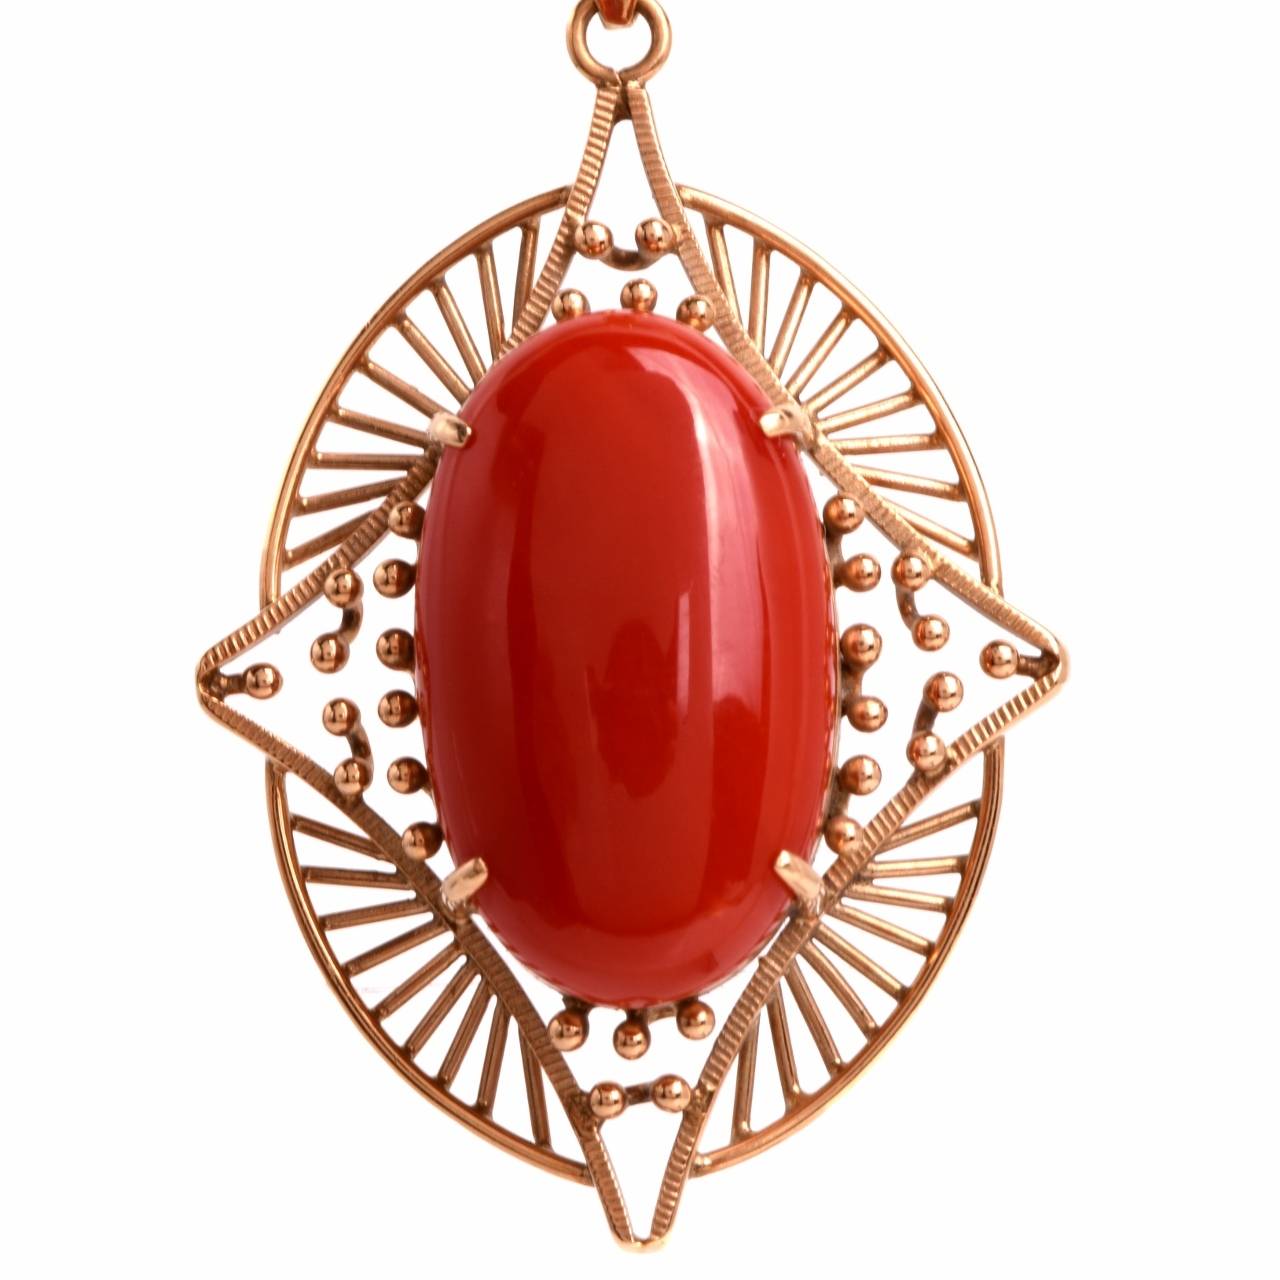 This authentic retro natural red coral  pendant epitomizing the Etruscan jewelry technique is handcrafted in 14K yellow  gold, weighs approx. 9.9  grams and measures 2